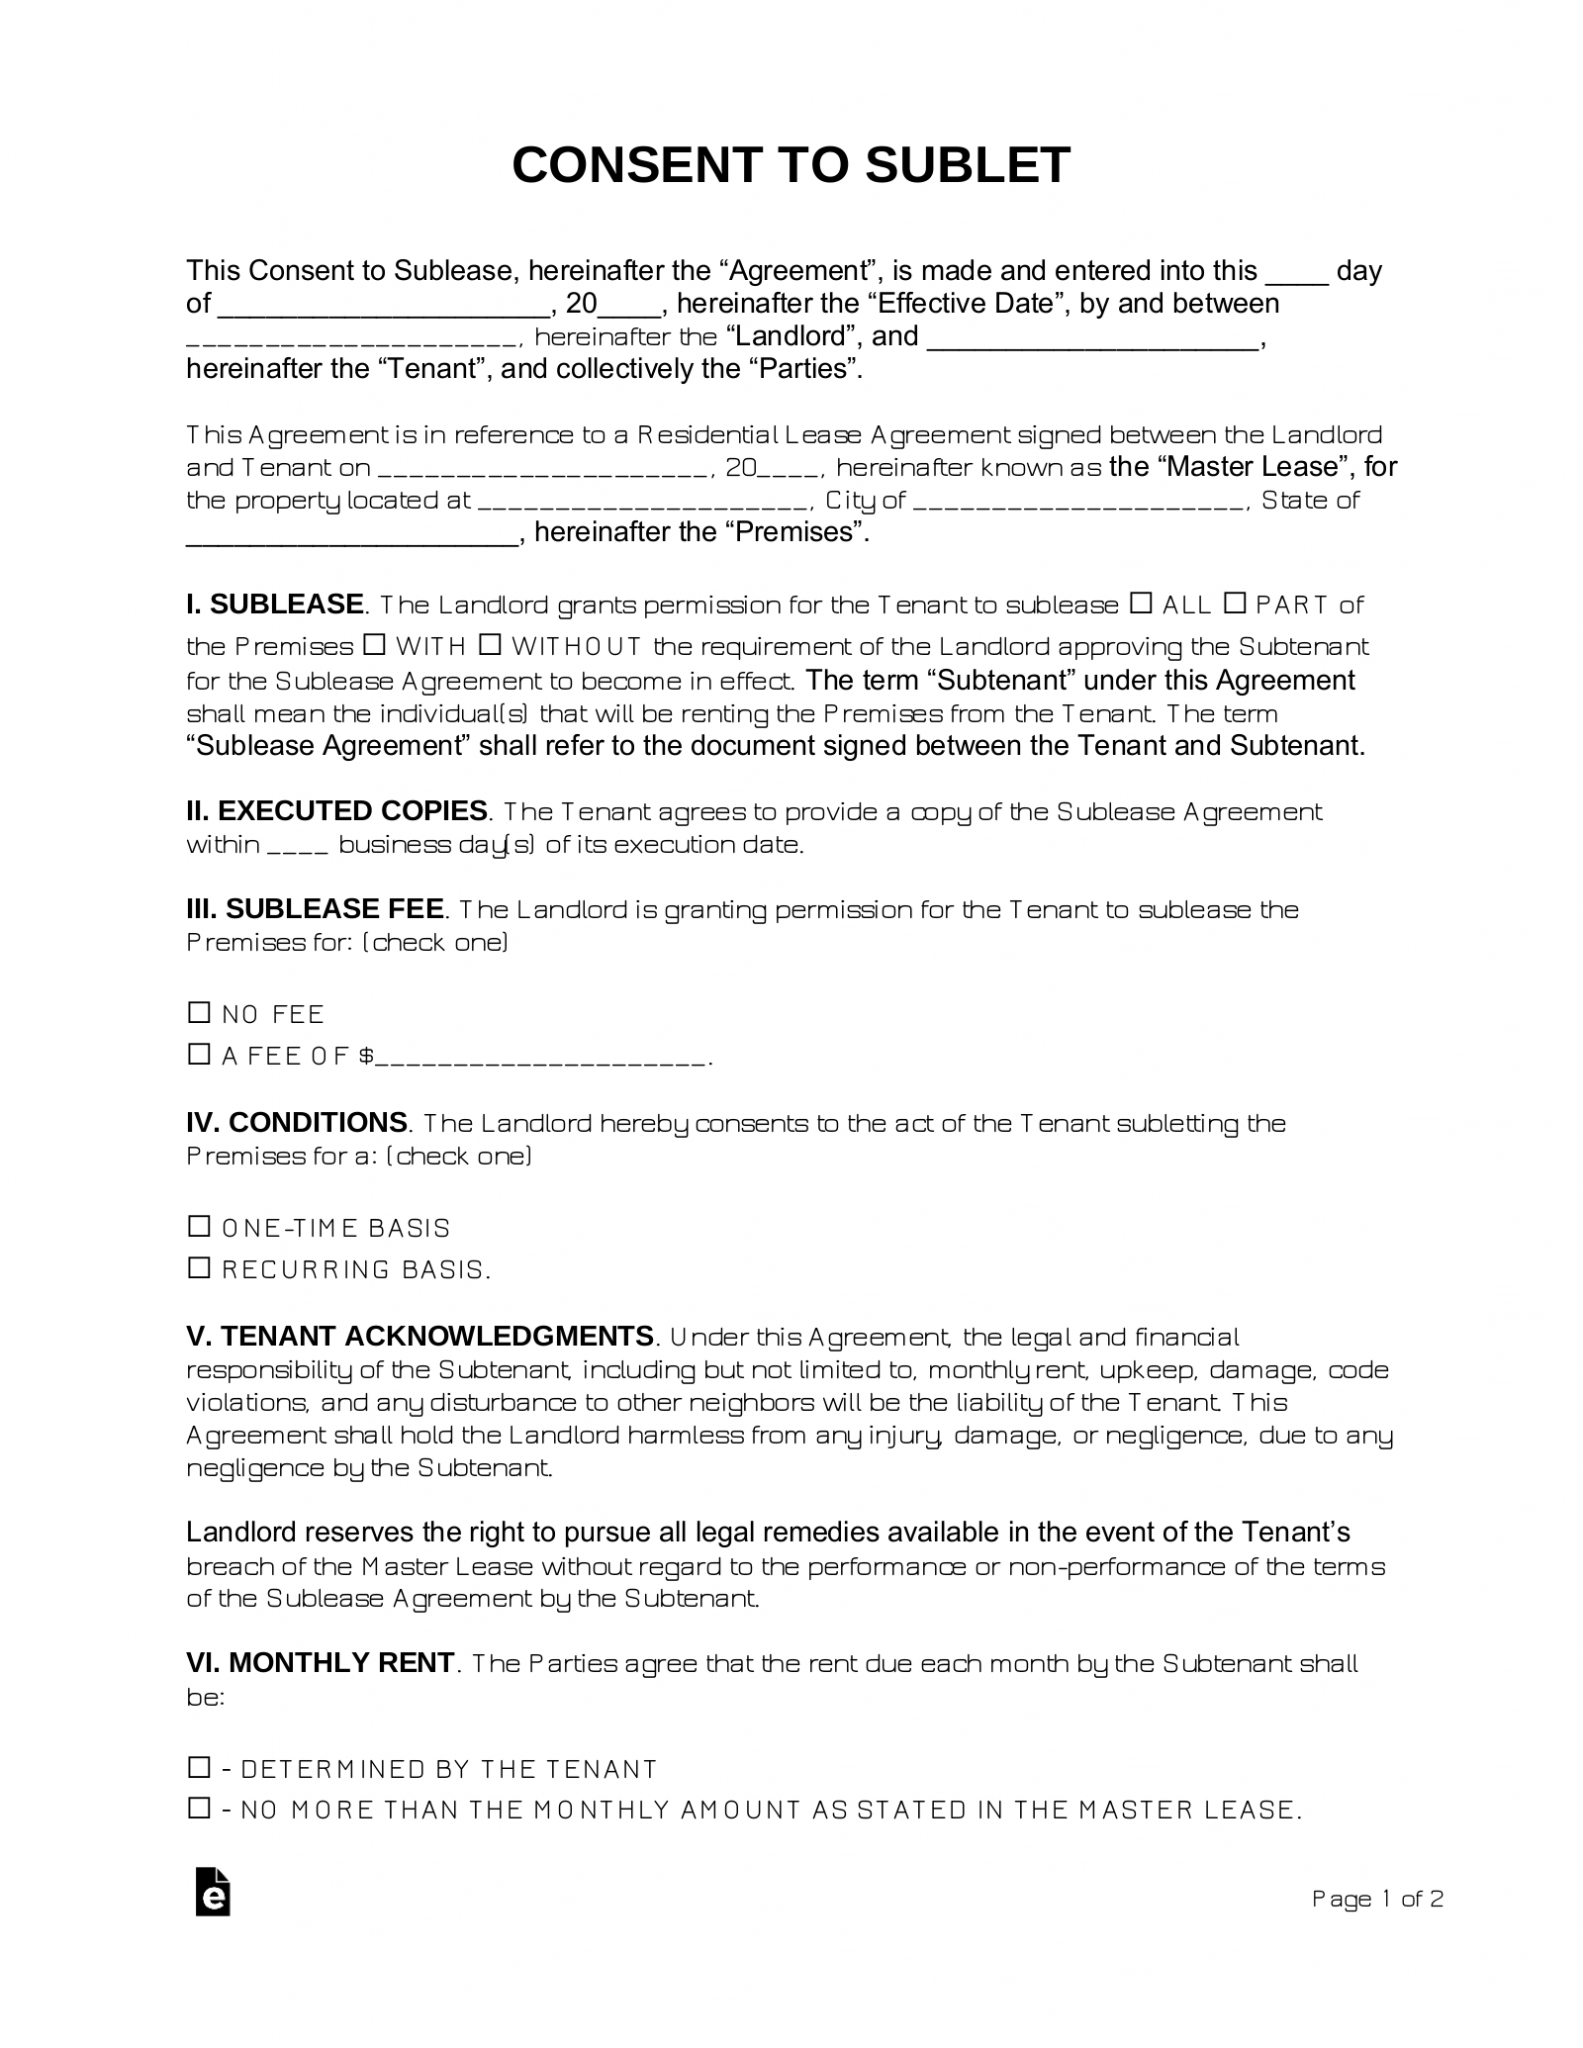 sublease-agreement-ontario-template-printable-word-searches